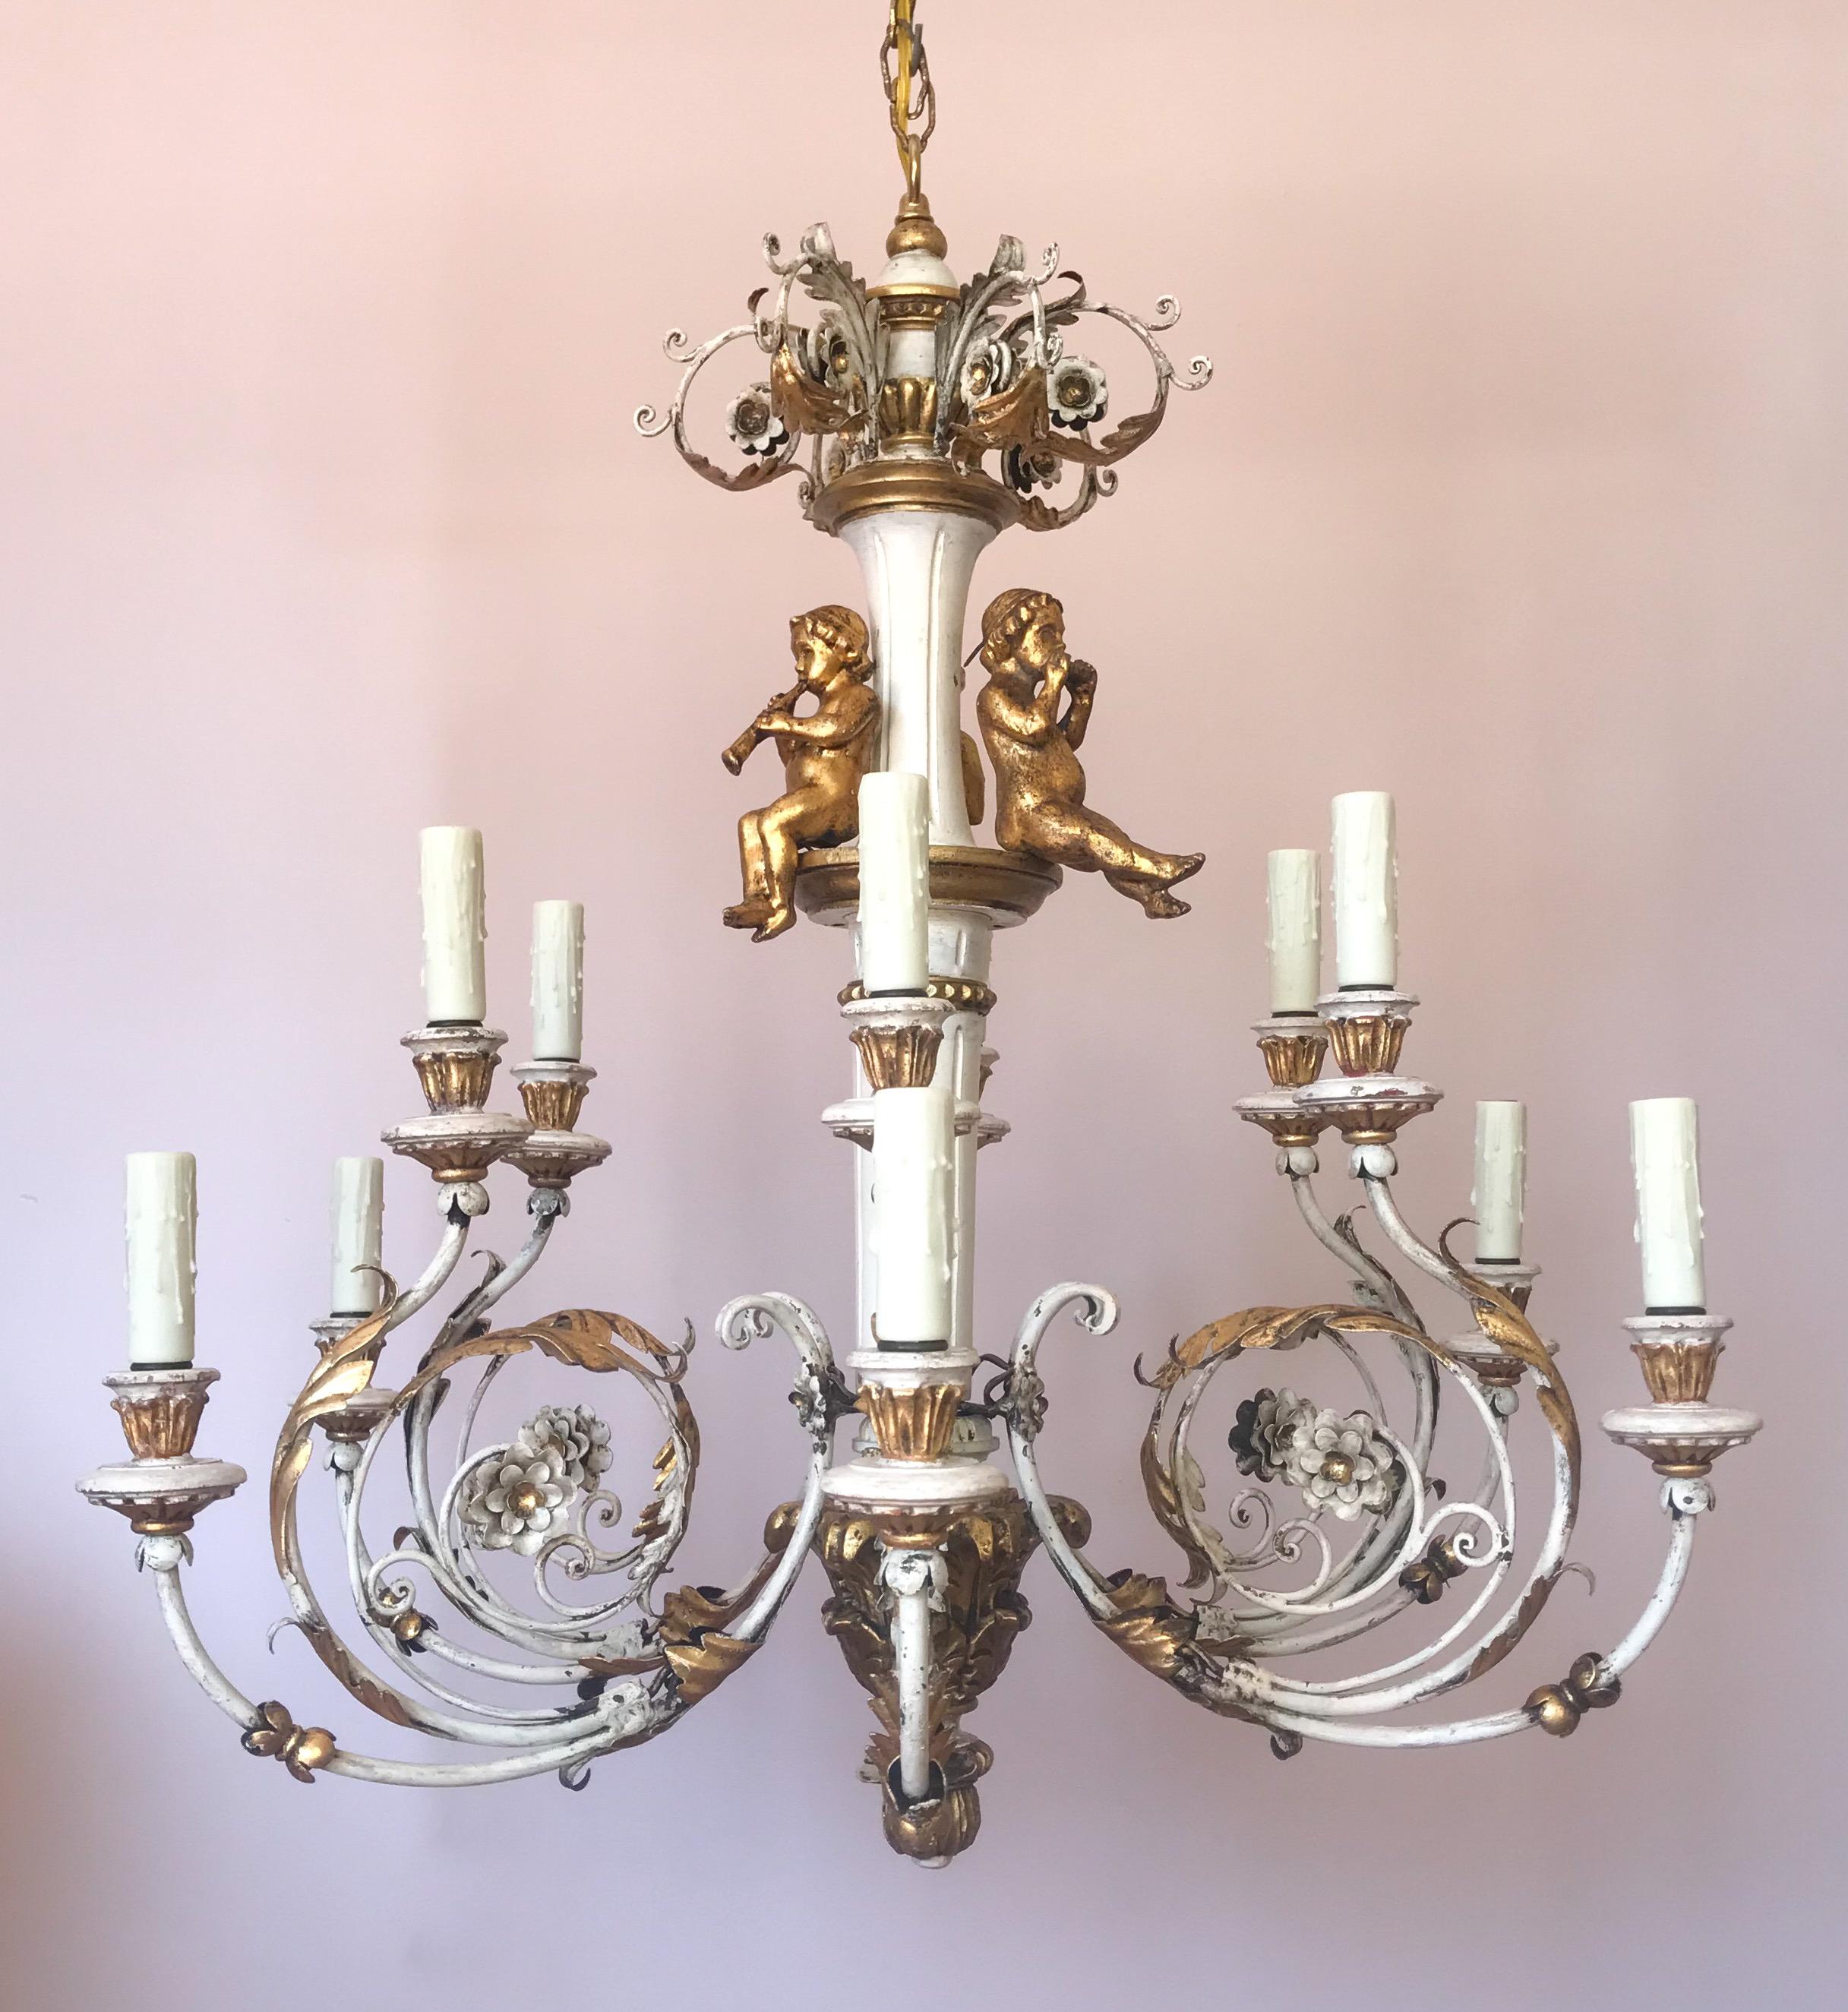 Gorgeous, 1940s Italian painted and parcel-gilt carved wood two-tier, twelve-light chandelier in the Louis XVI style. 

This beautiful chandelier consists of a painted carved wood column with 3 gilded wood cherubs playing musical instruments. Six